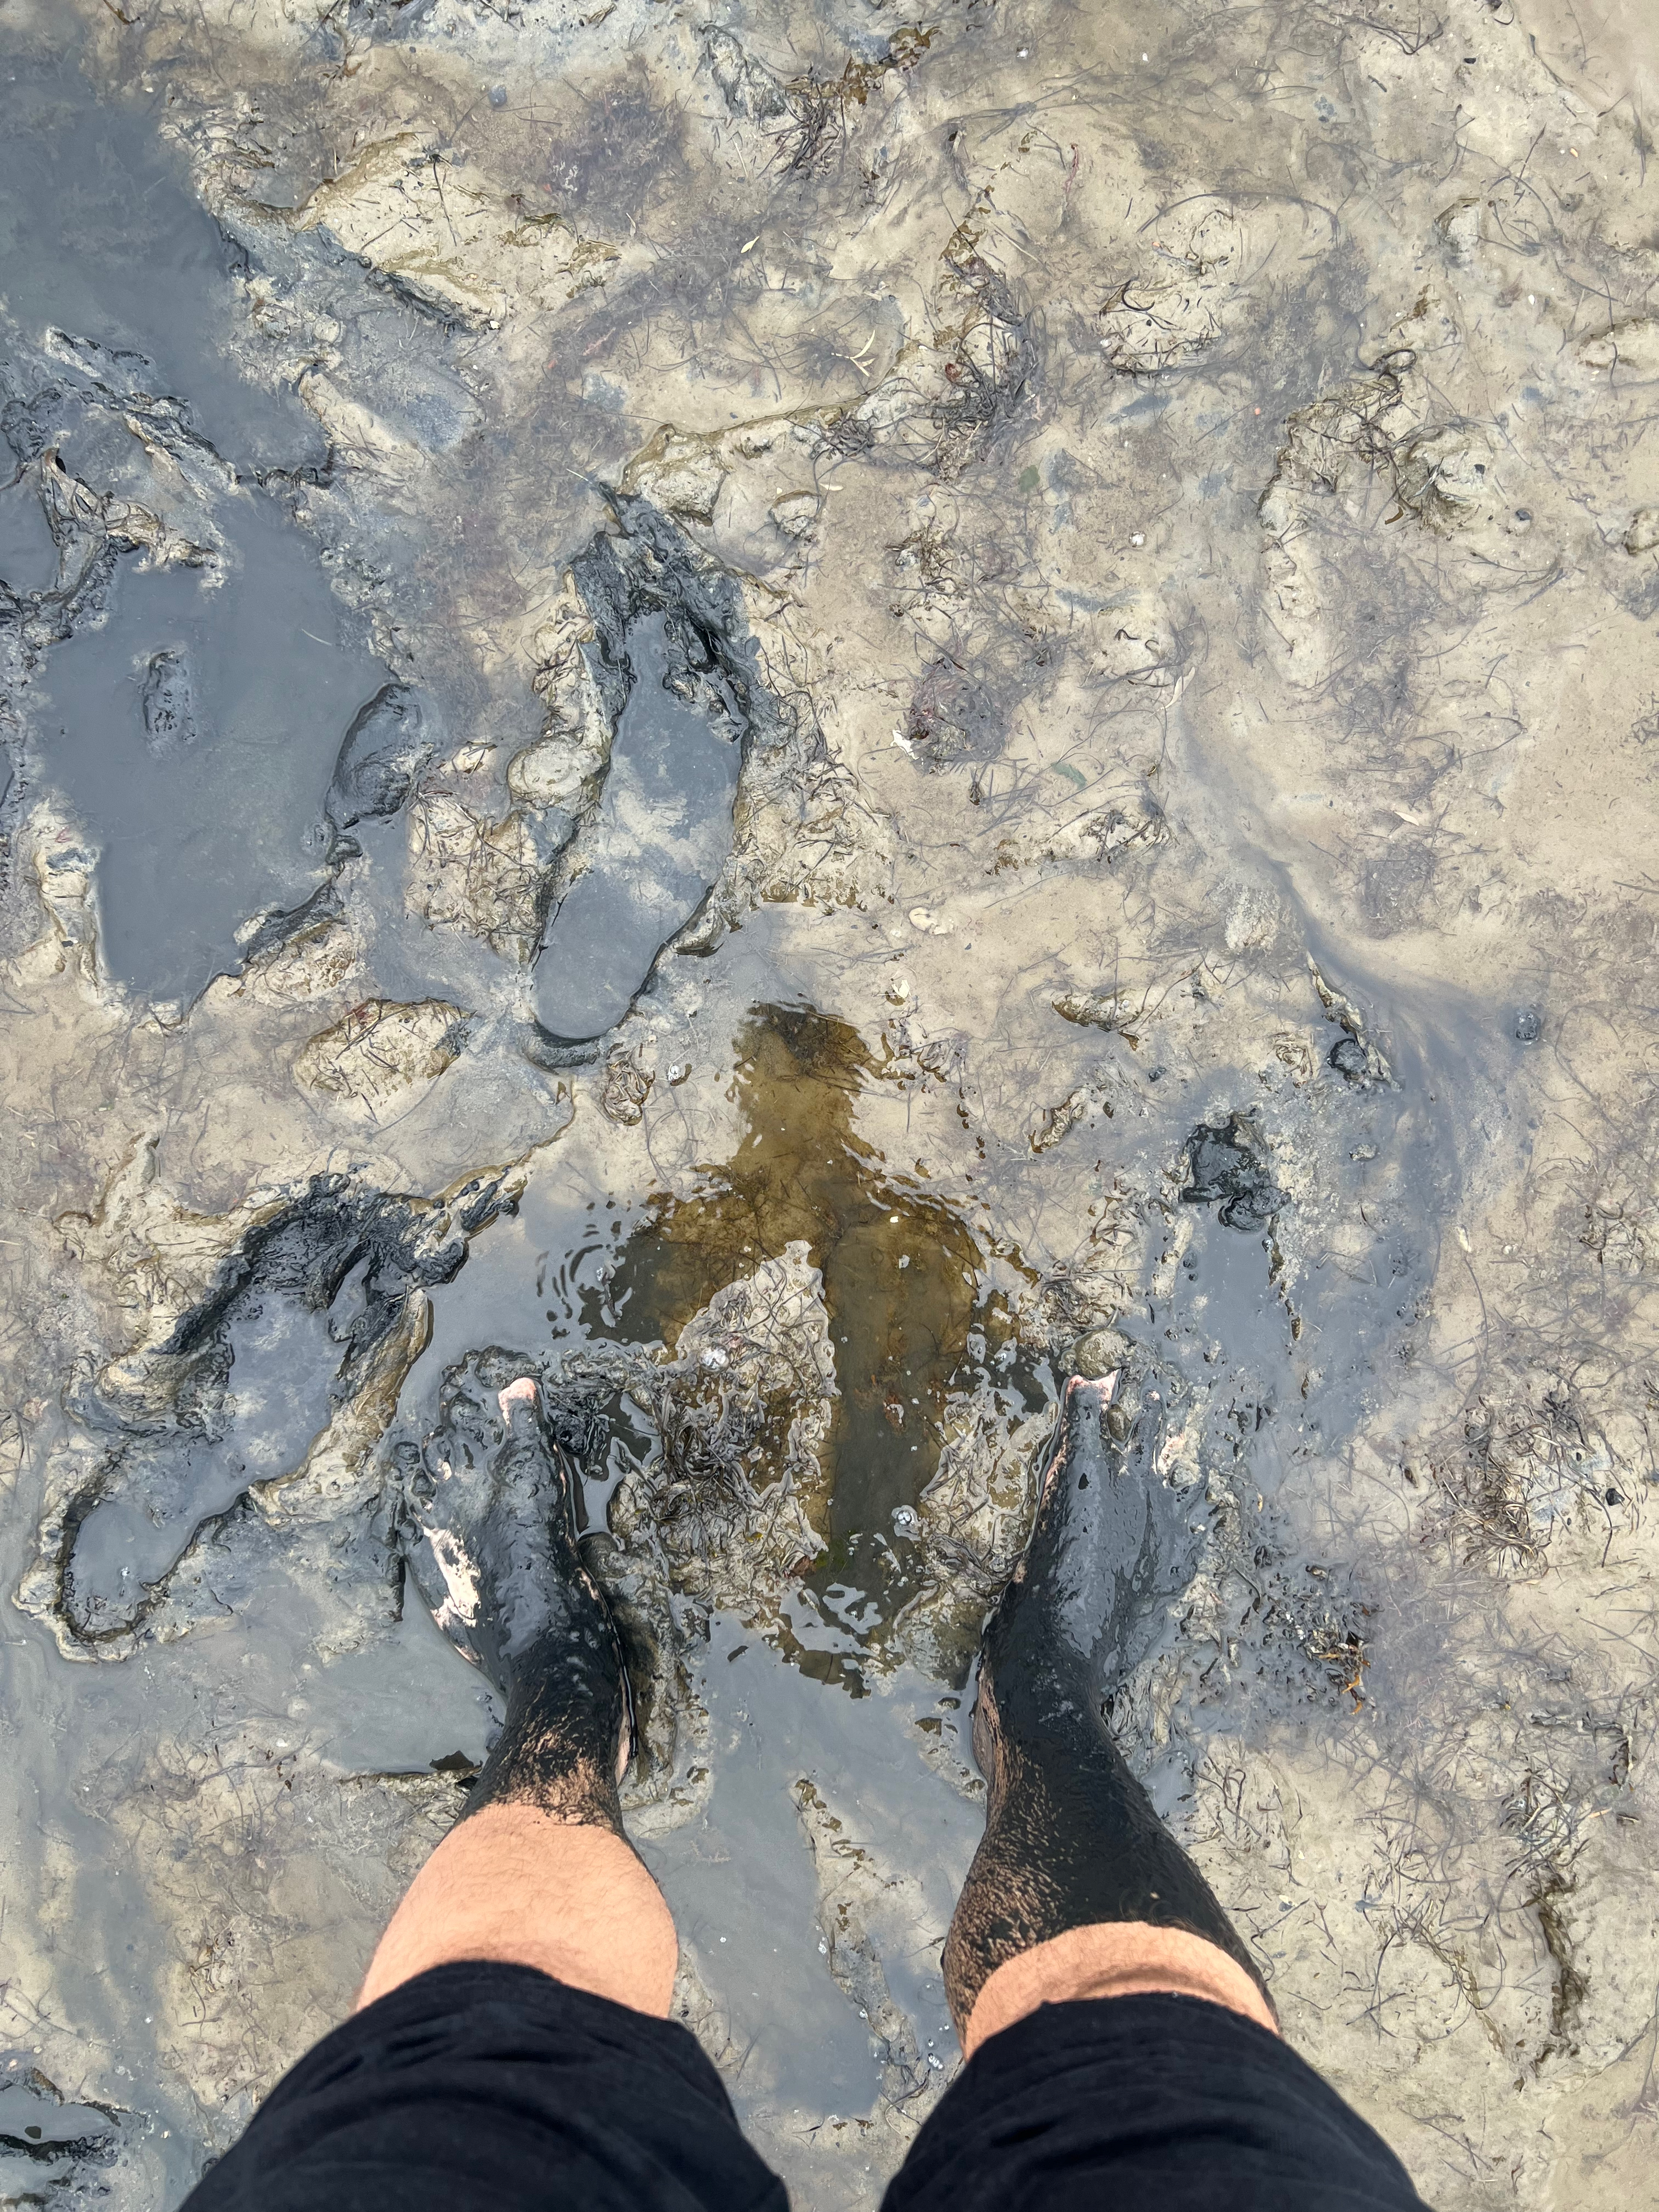 My feet after wading through the silt